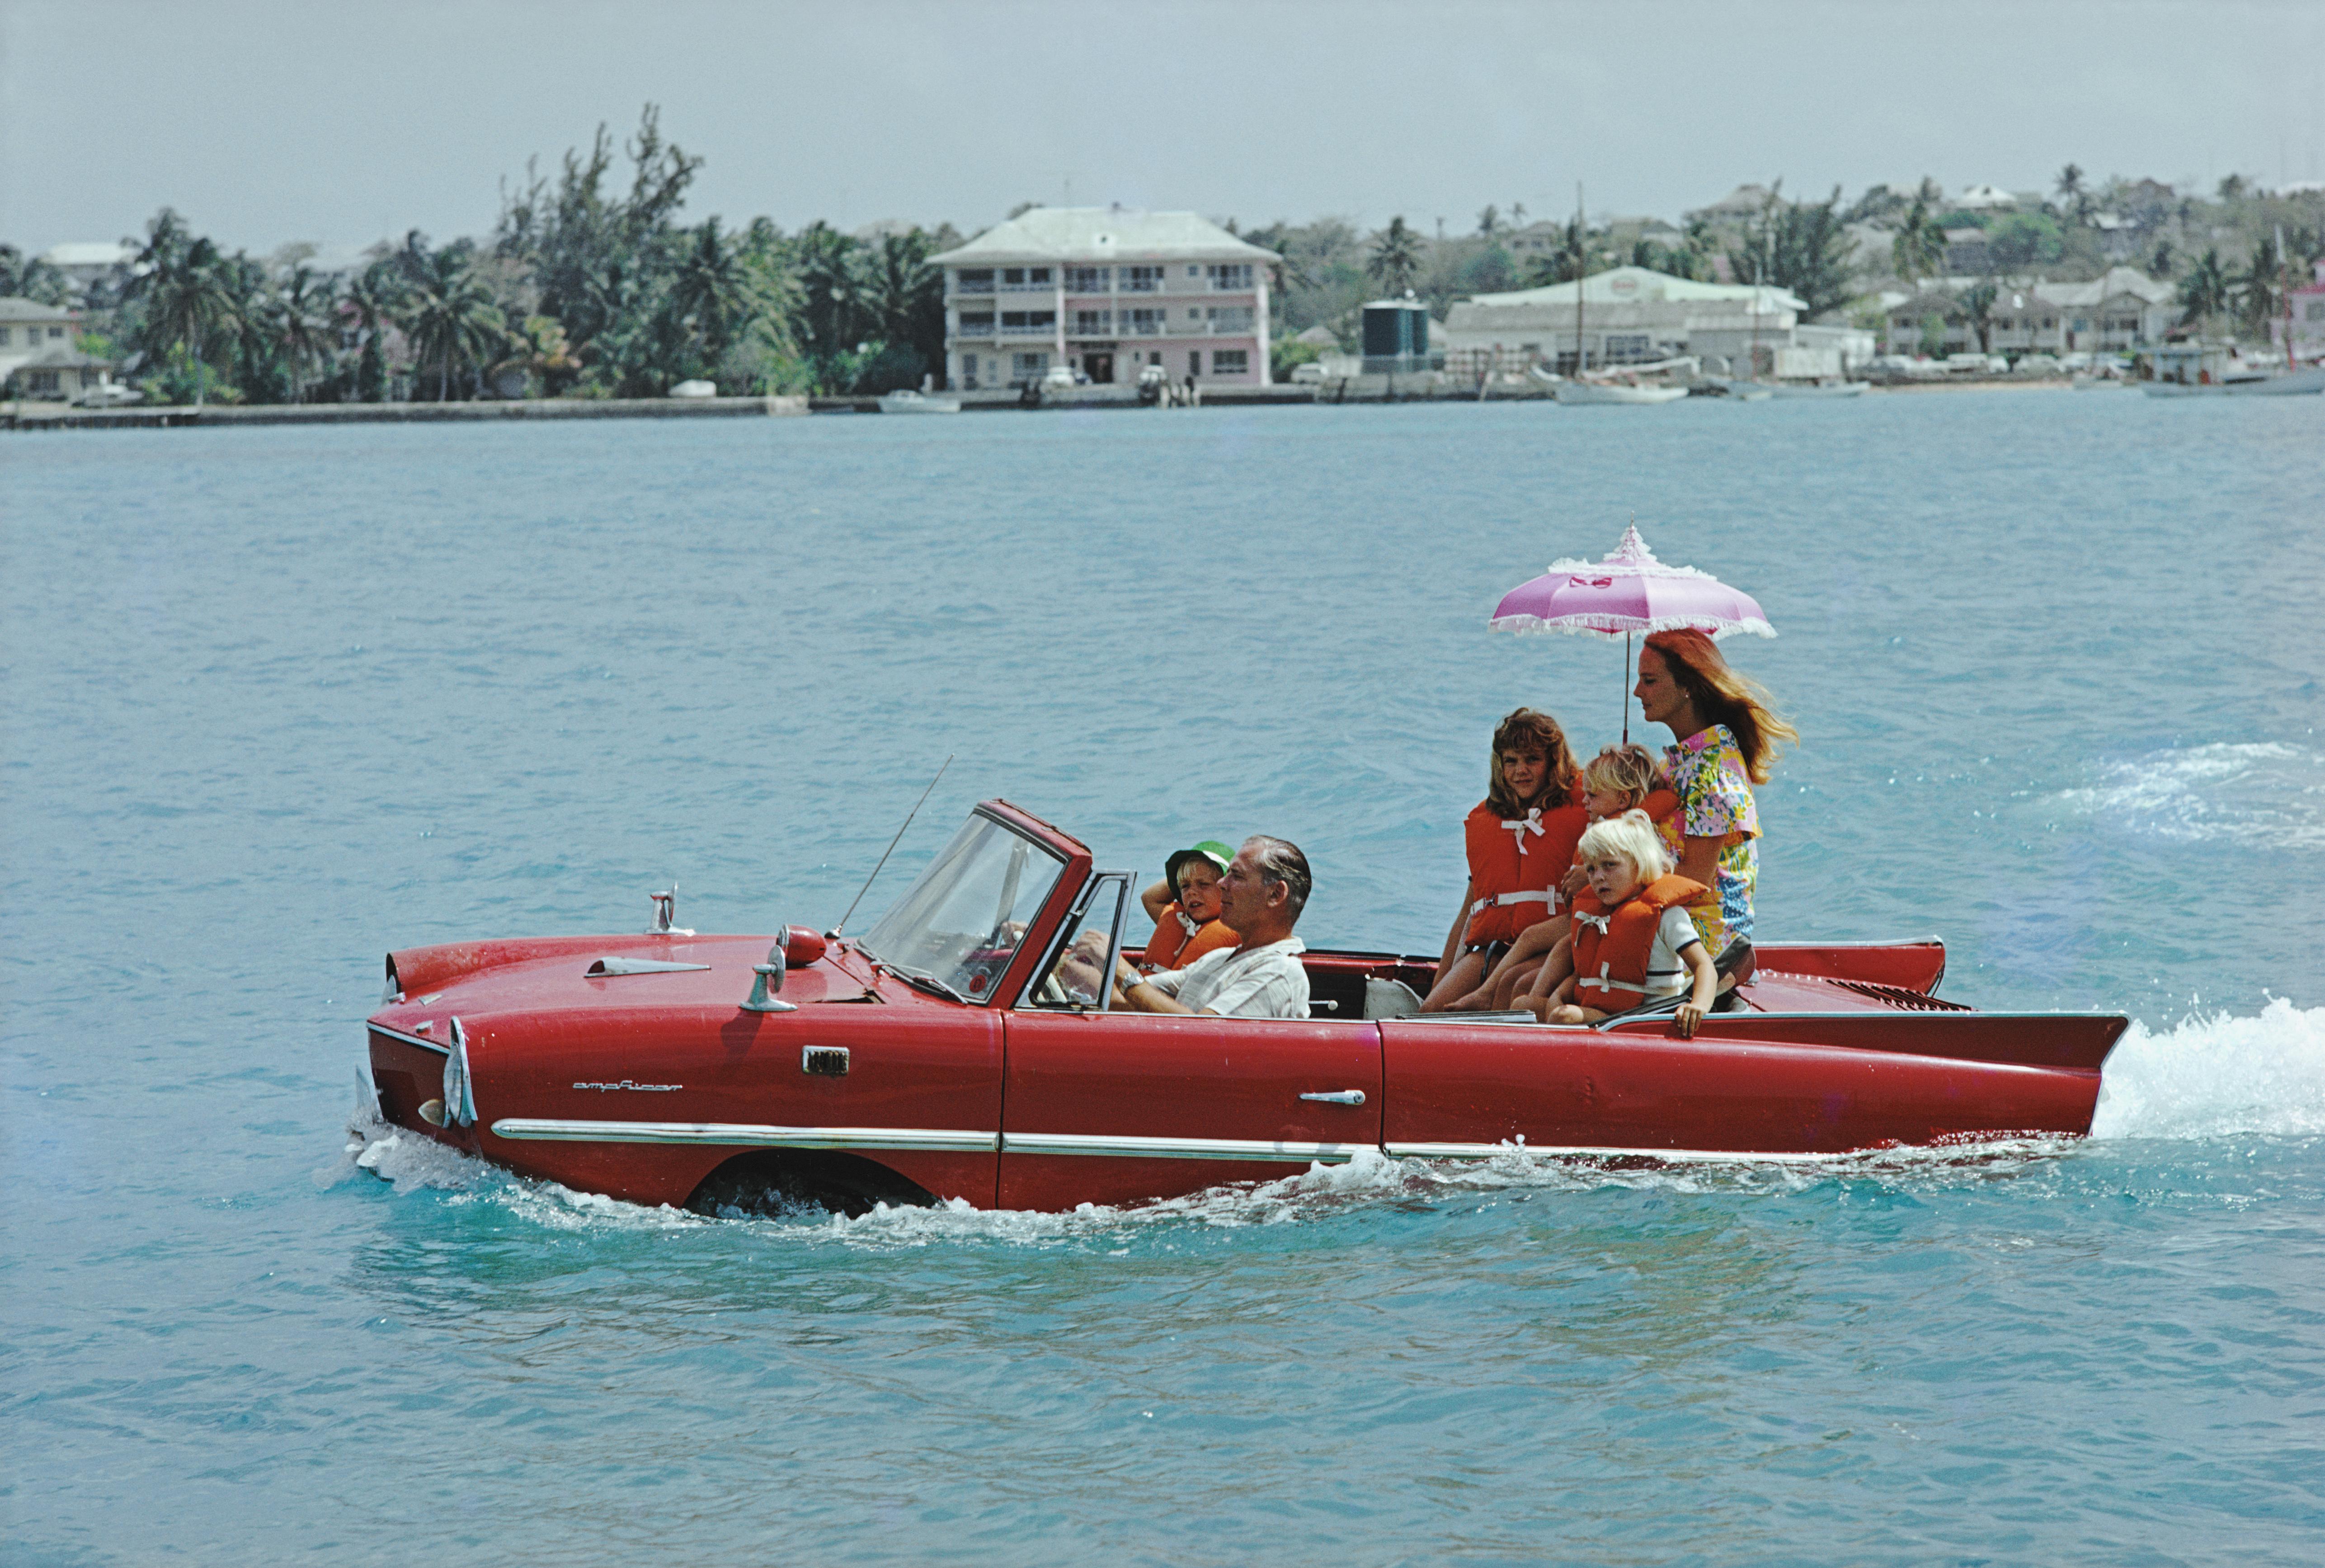 'Sea Drive' 1967 Slim Aarons Limited Estate Edition
1967. Film producer Kevin McClory takes his wife Bobo Sigrist and their family for a drive in an ‘Amphicar’ across the harbour at Nassau. The children are Bianca Juarez (Bobo’s daughter from